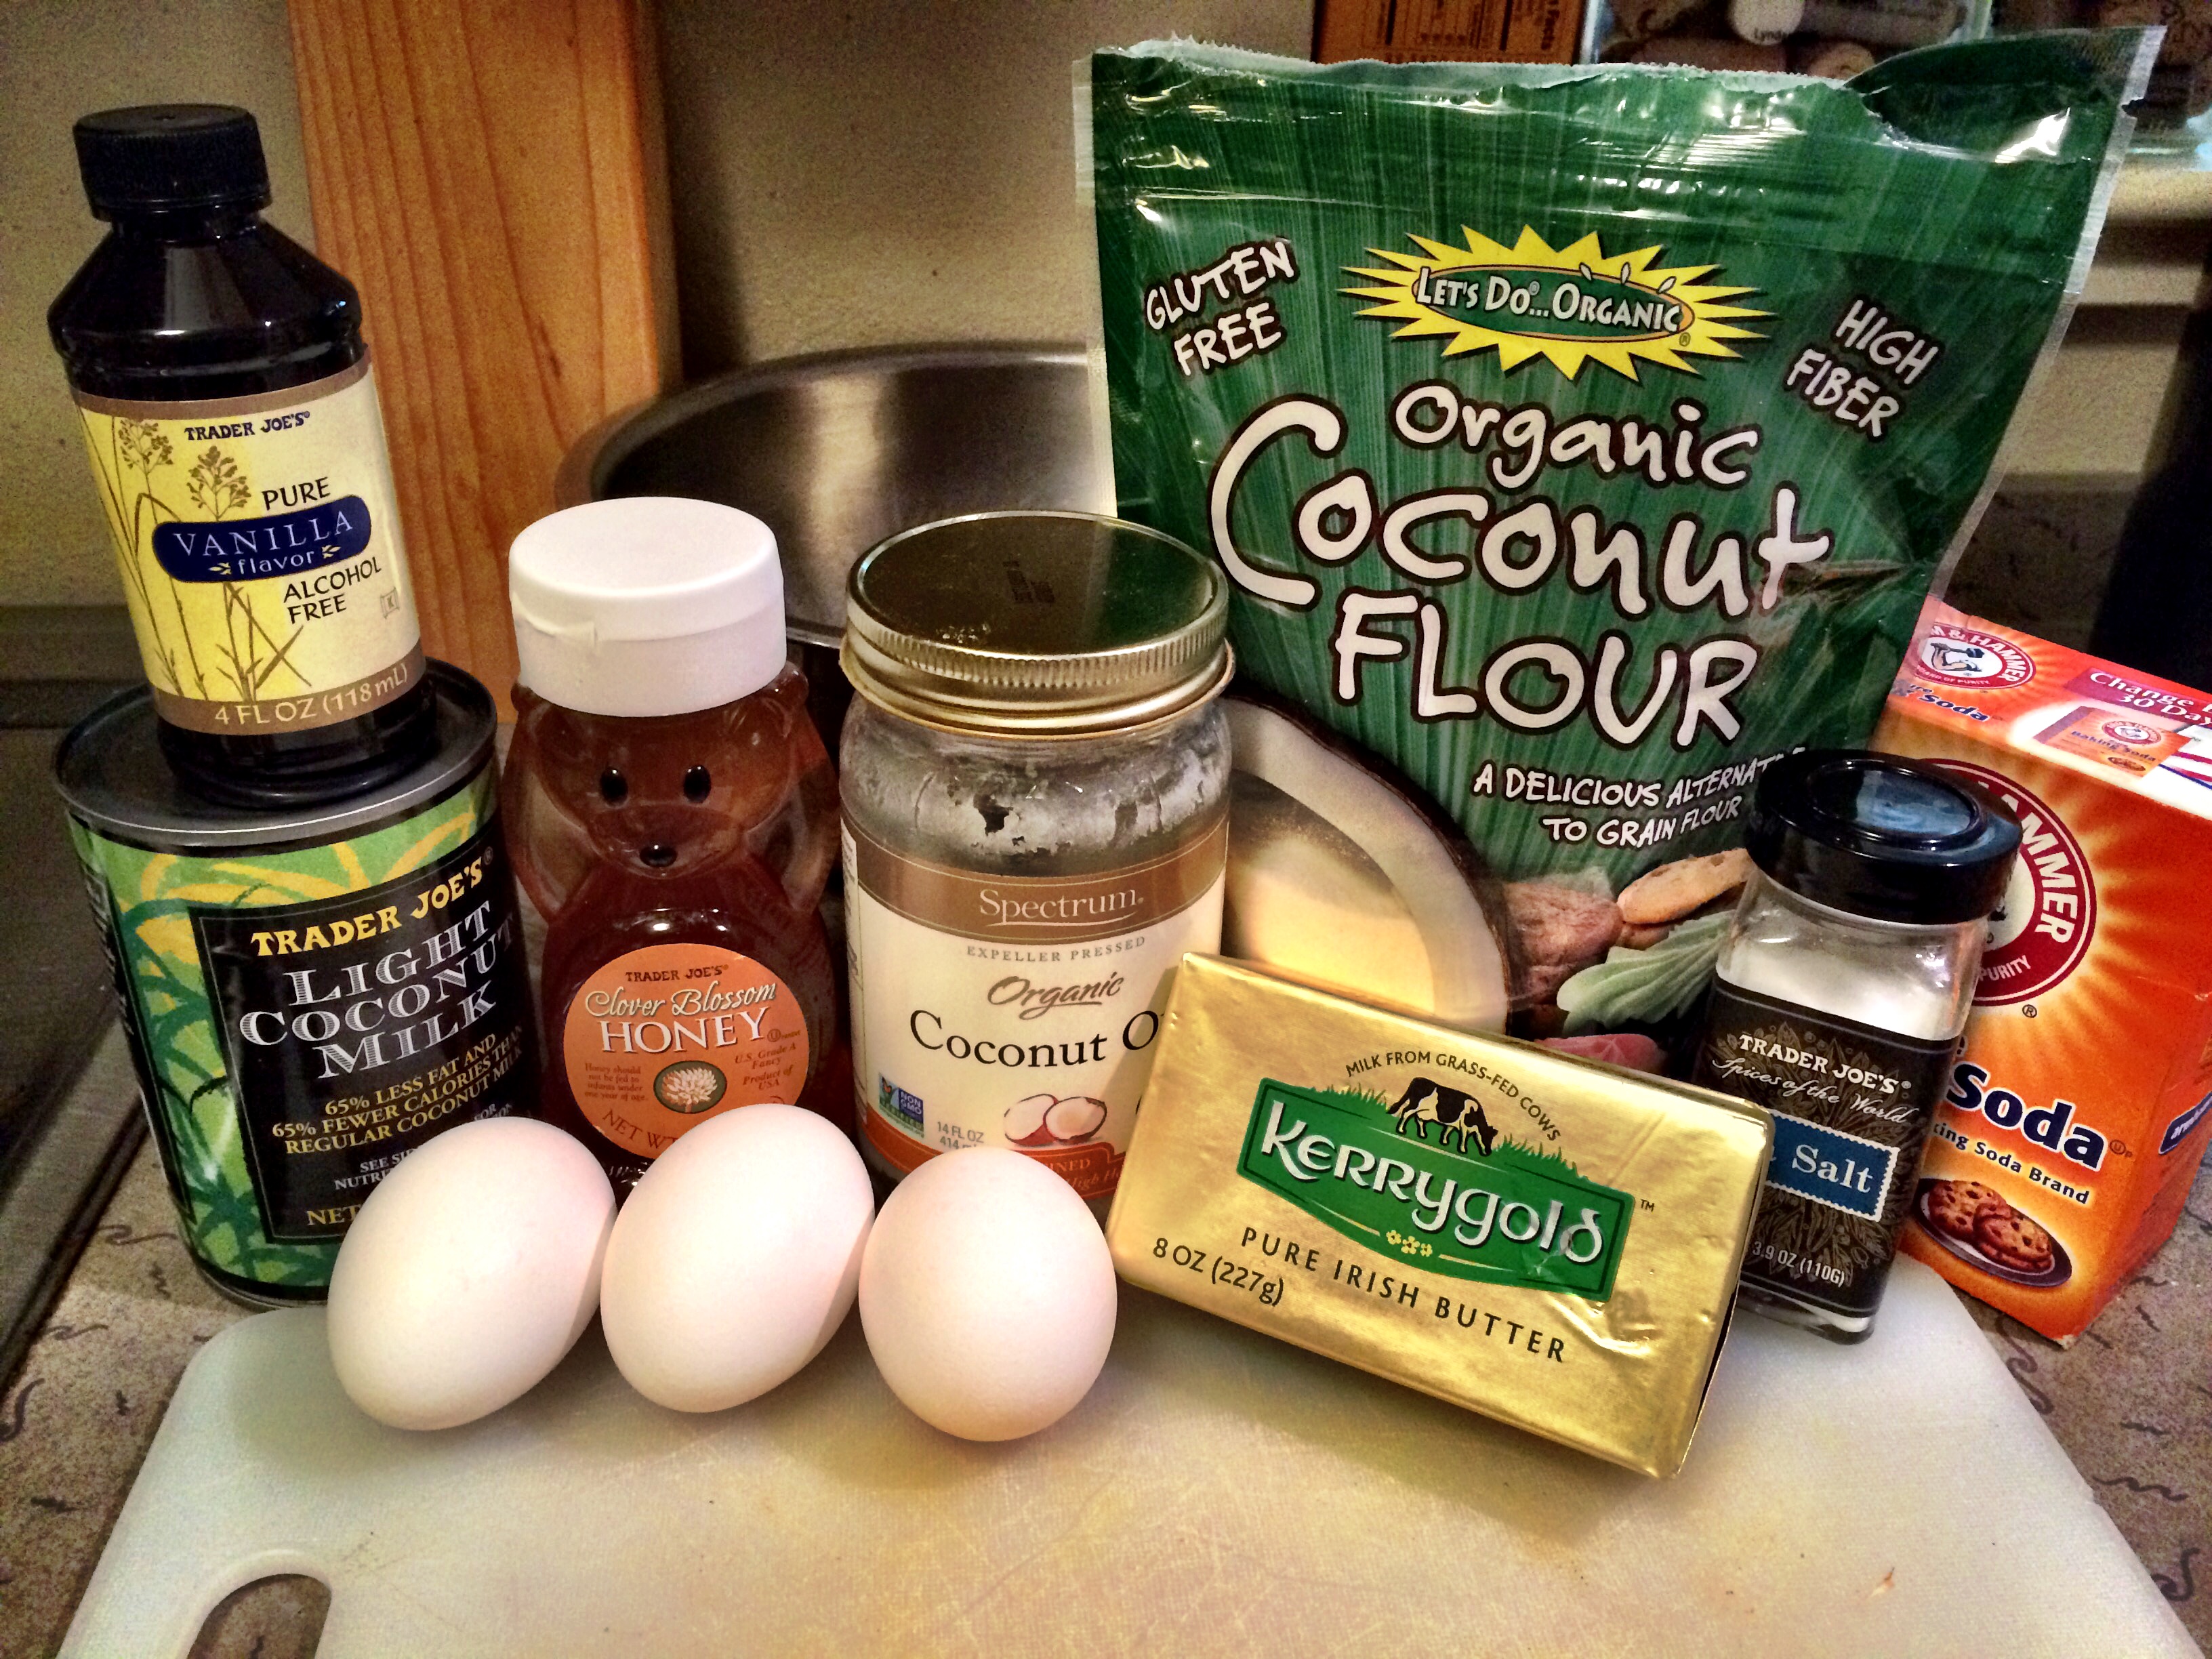 Meal prep: 3/22/15 – Beef Stew, Egg Frittata, and Paleo Pancakes